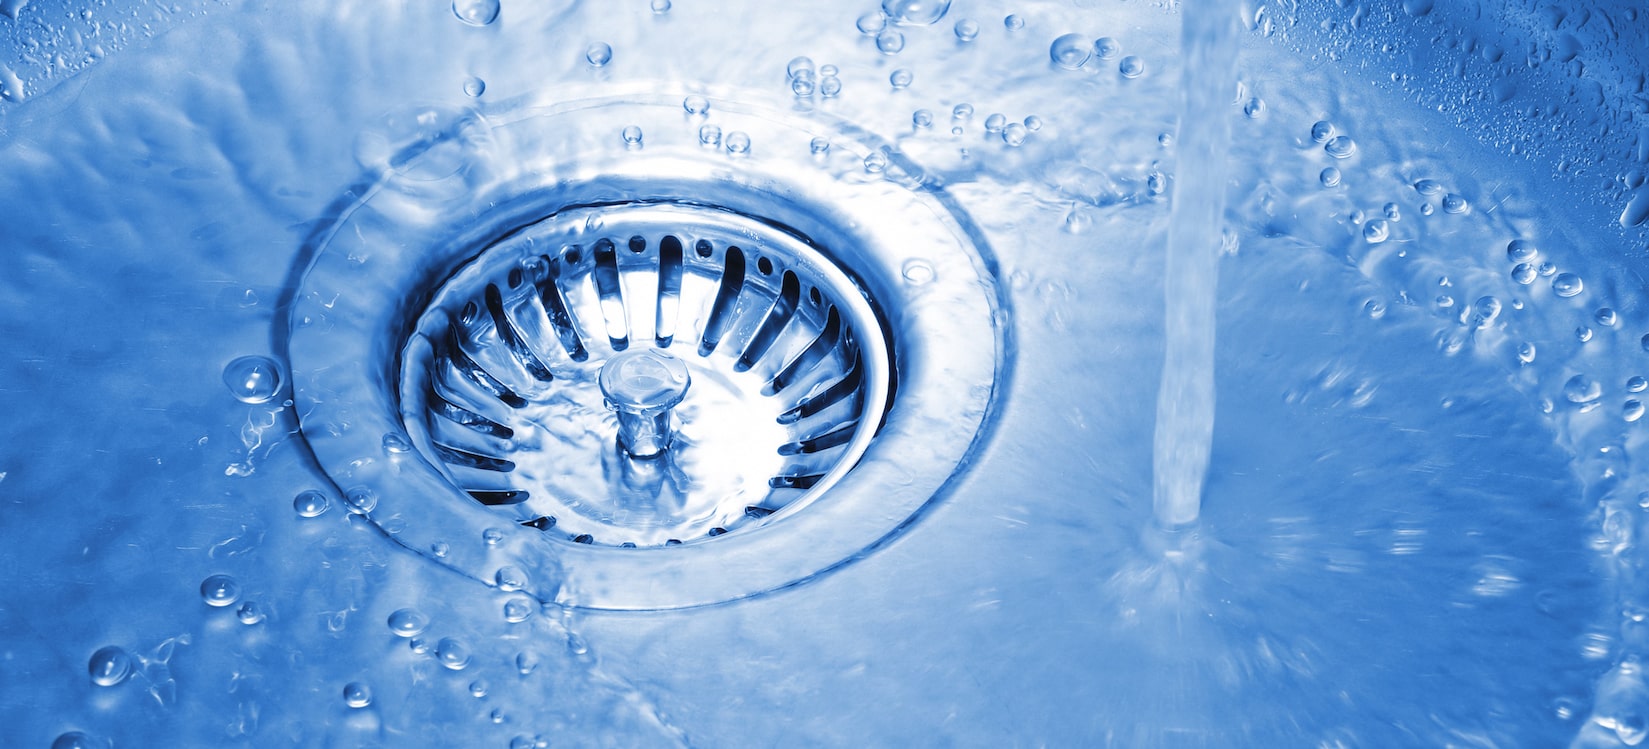 Denver Drain Cleaning and Drain Clearing